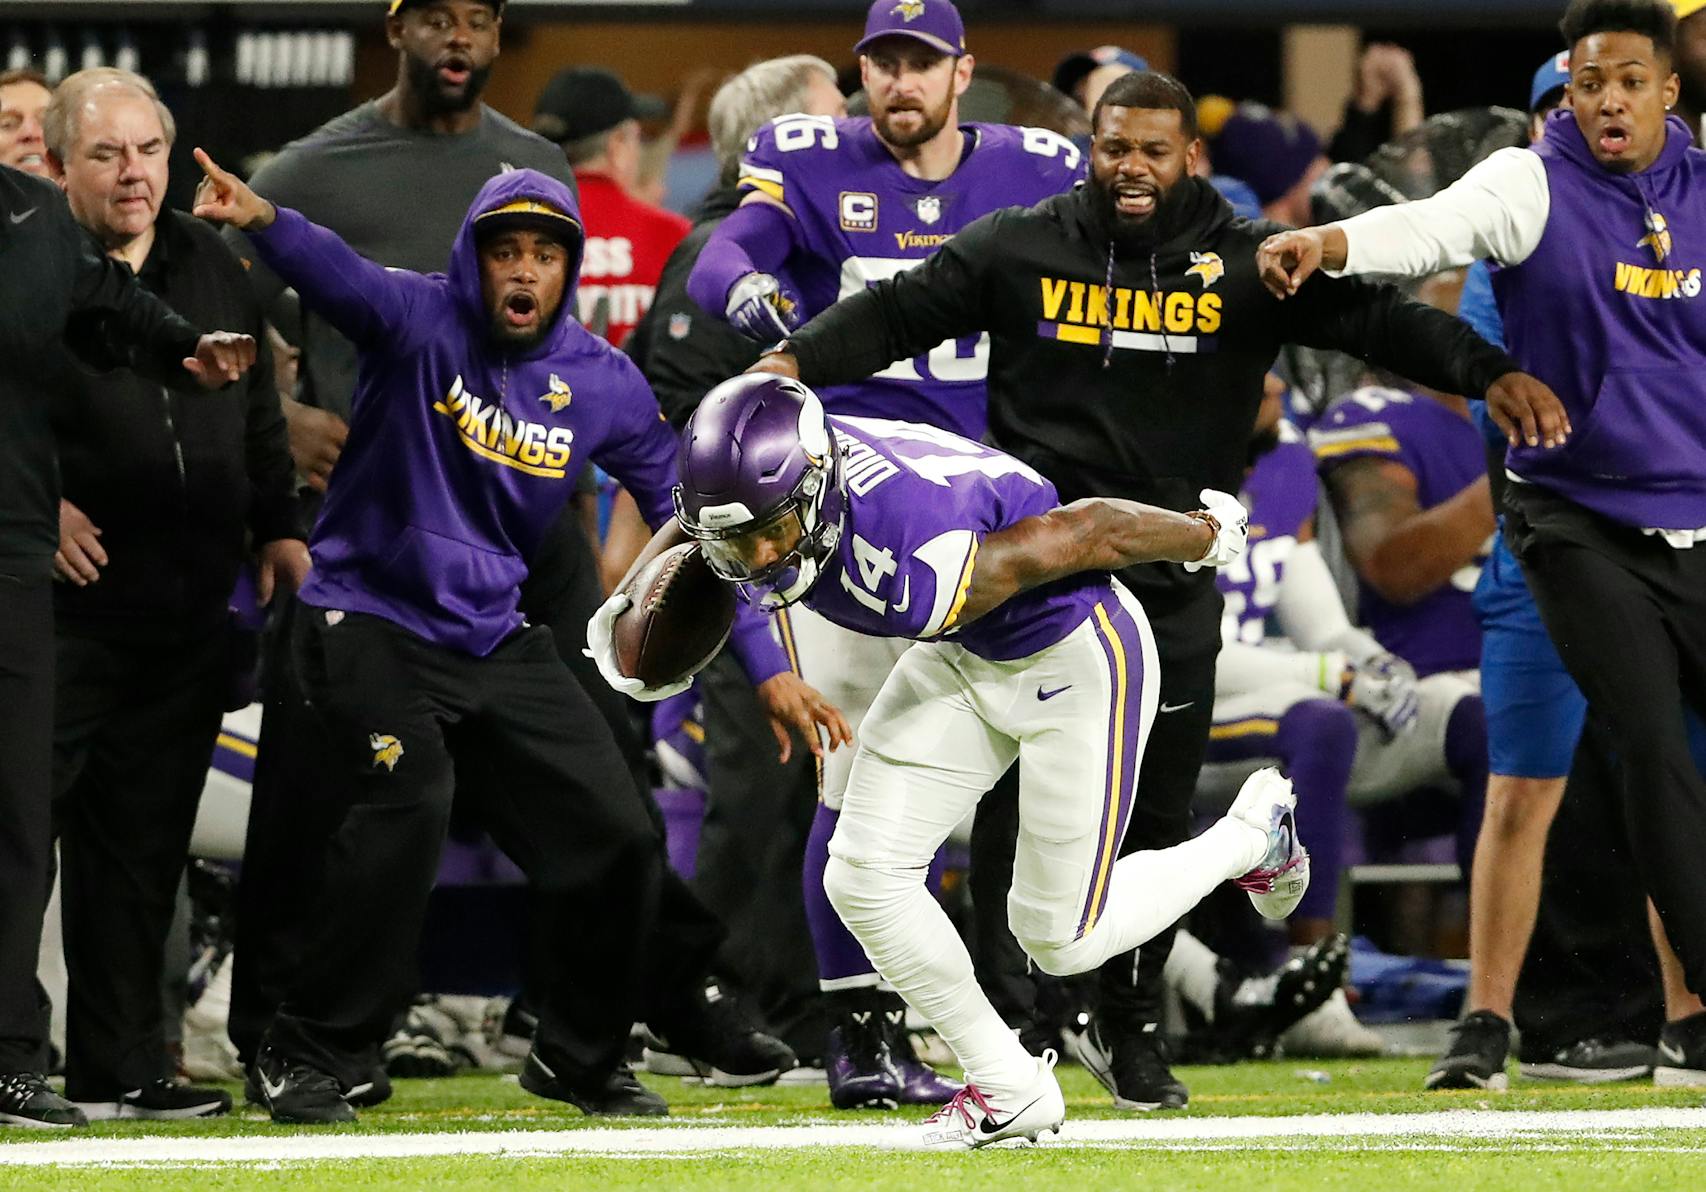 Vikings receiver Stefon Diggs scored on a 61-yard touchdown pass from Case Keenum to win the game.